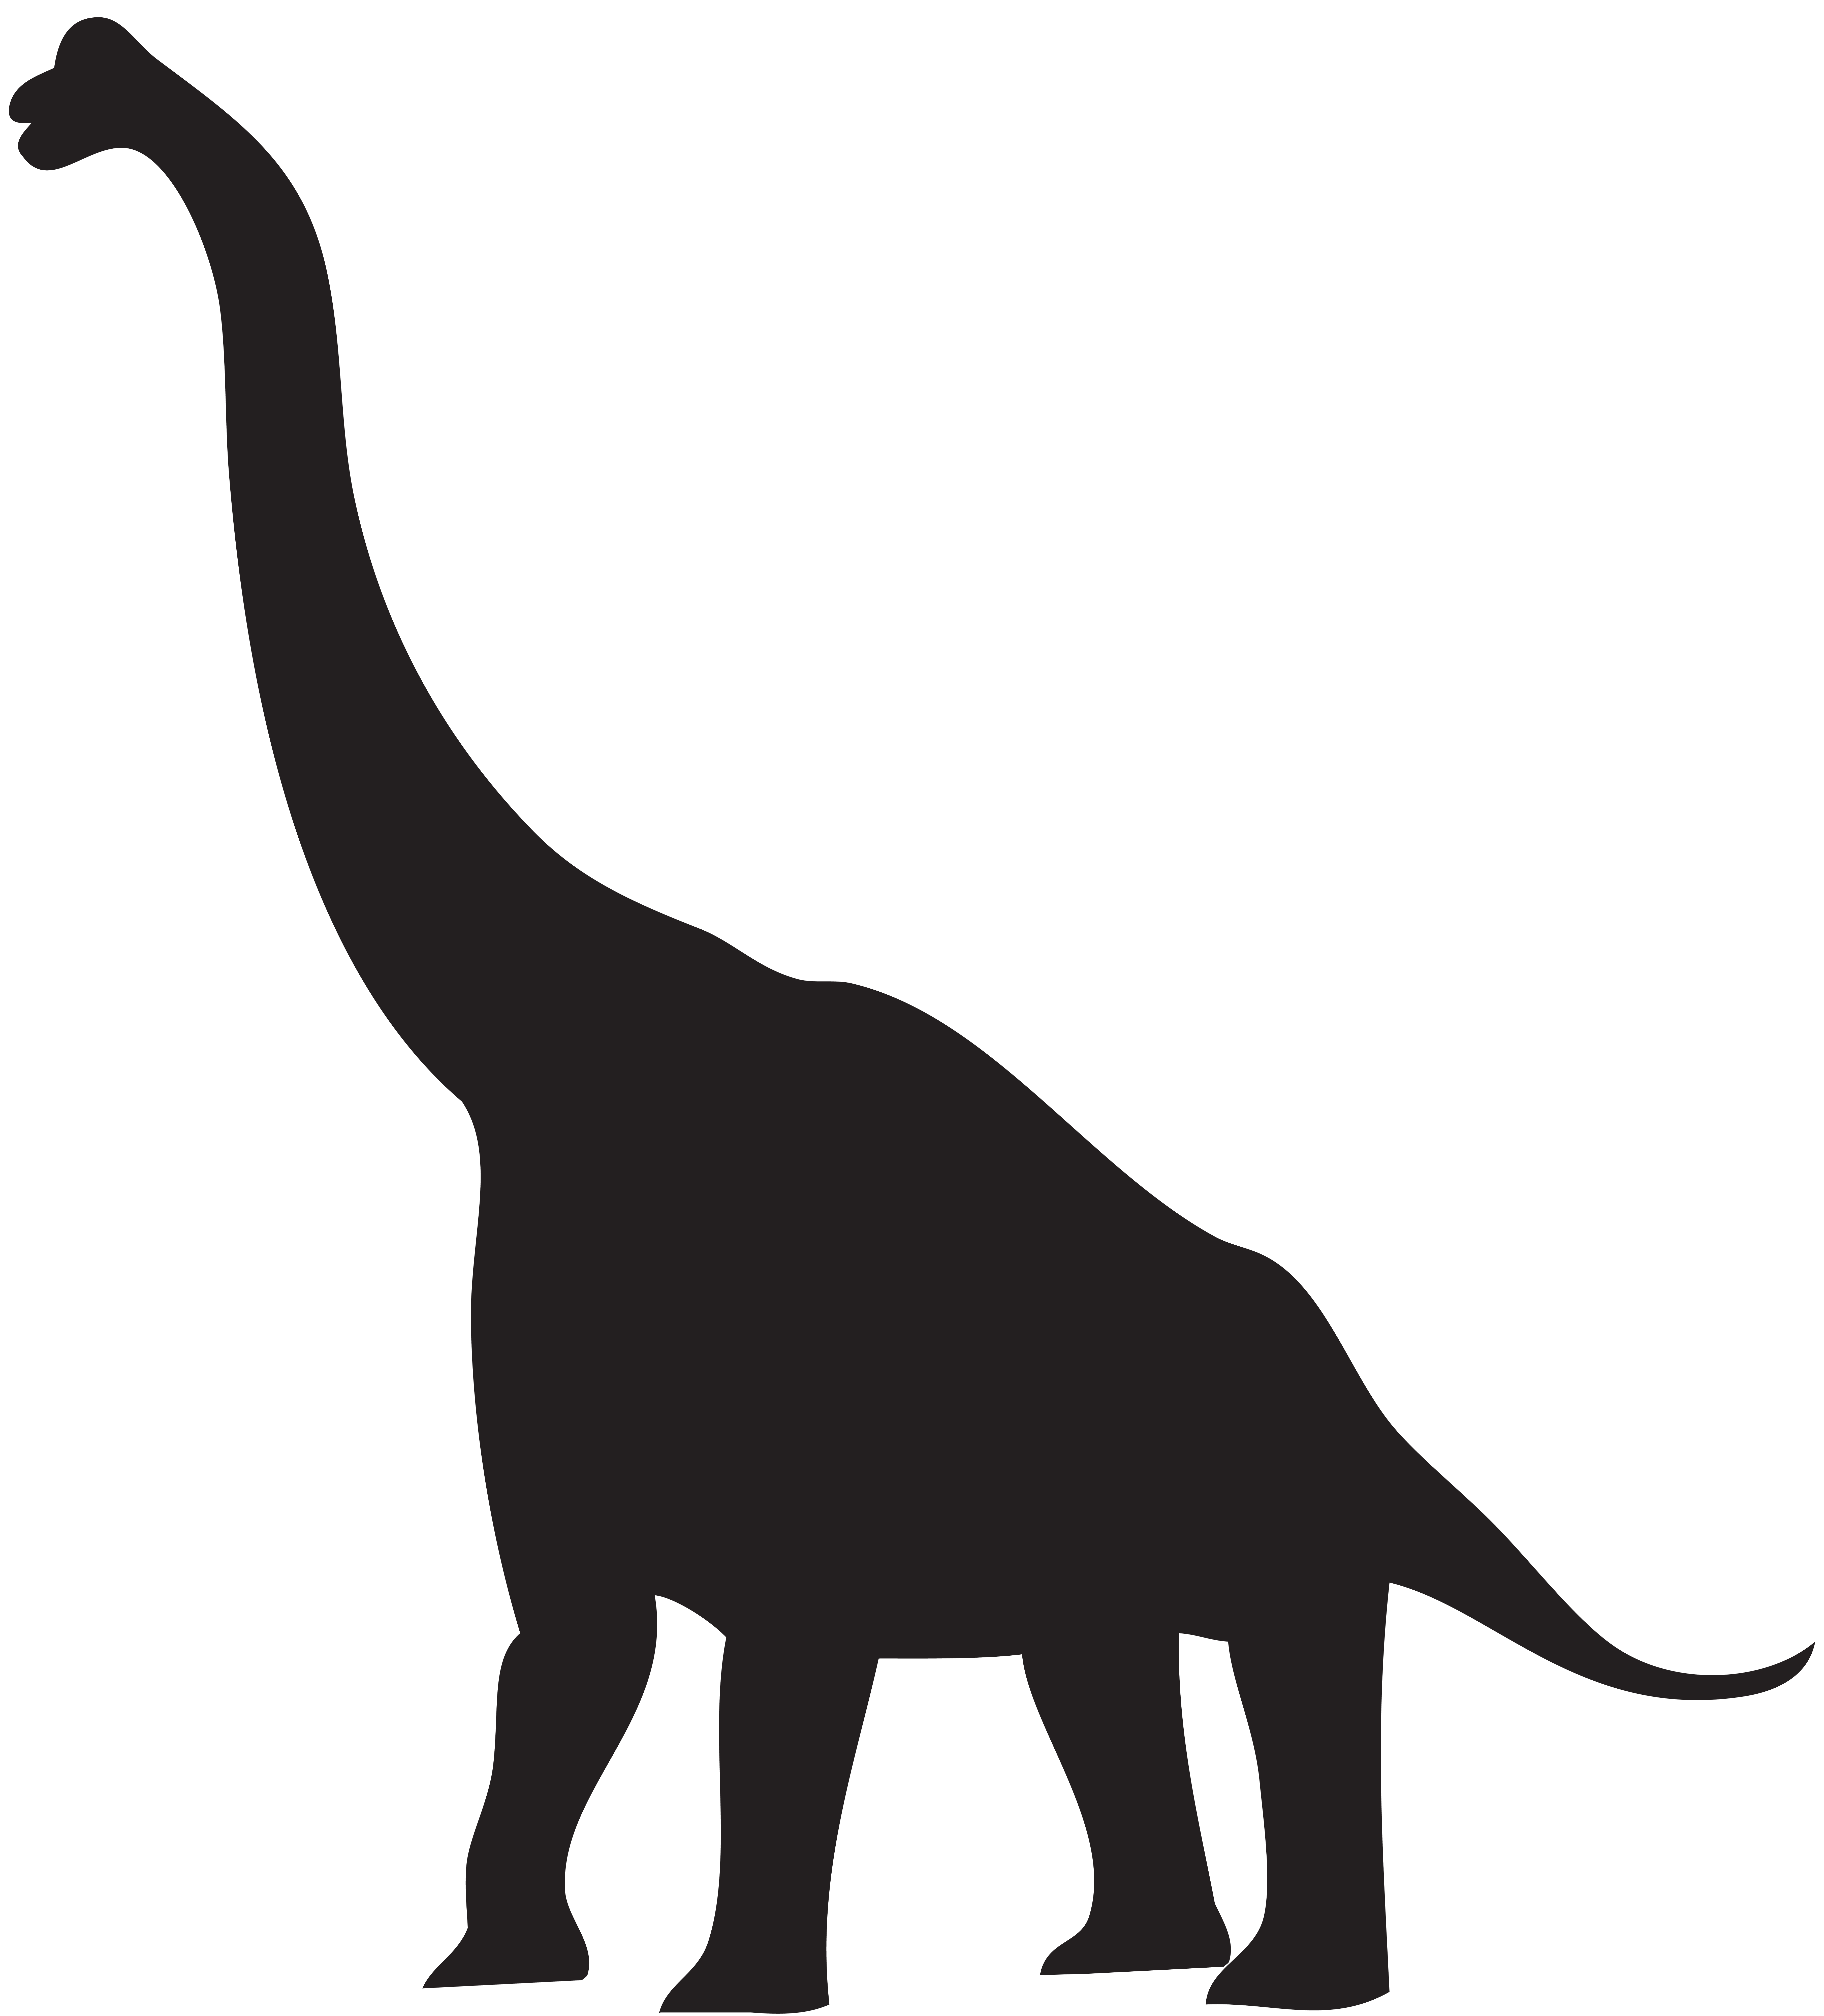 Dinosaur clipart silhouette, Dinosaur silhouette Transparent FREE for download on WebStockReview